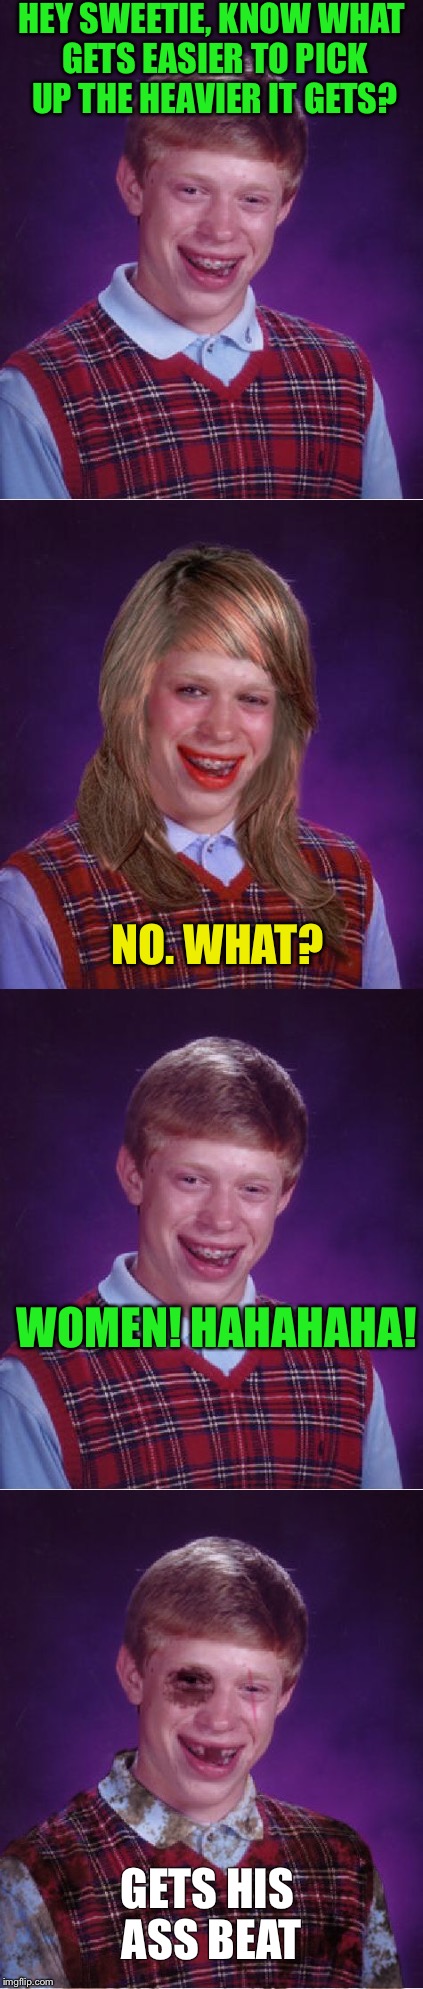 Bad luck Brian tells a joke. | HEY SWEETIE, KNOW WHAT GETS EASIER TO PICK UP THE HEAVIER IT GETS? NO. WHAT? WOMEN! HAHAHAHA! GETS HIS ASS BEAT | image tagged in bad luck brian,funny memes,bad luck brianna,funny joke | made w/ Imgflip meme maker